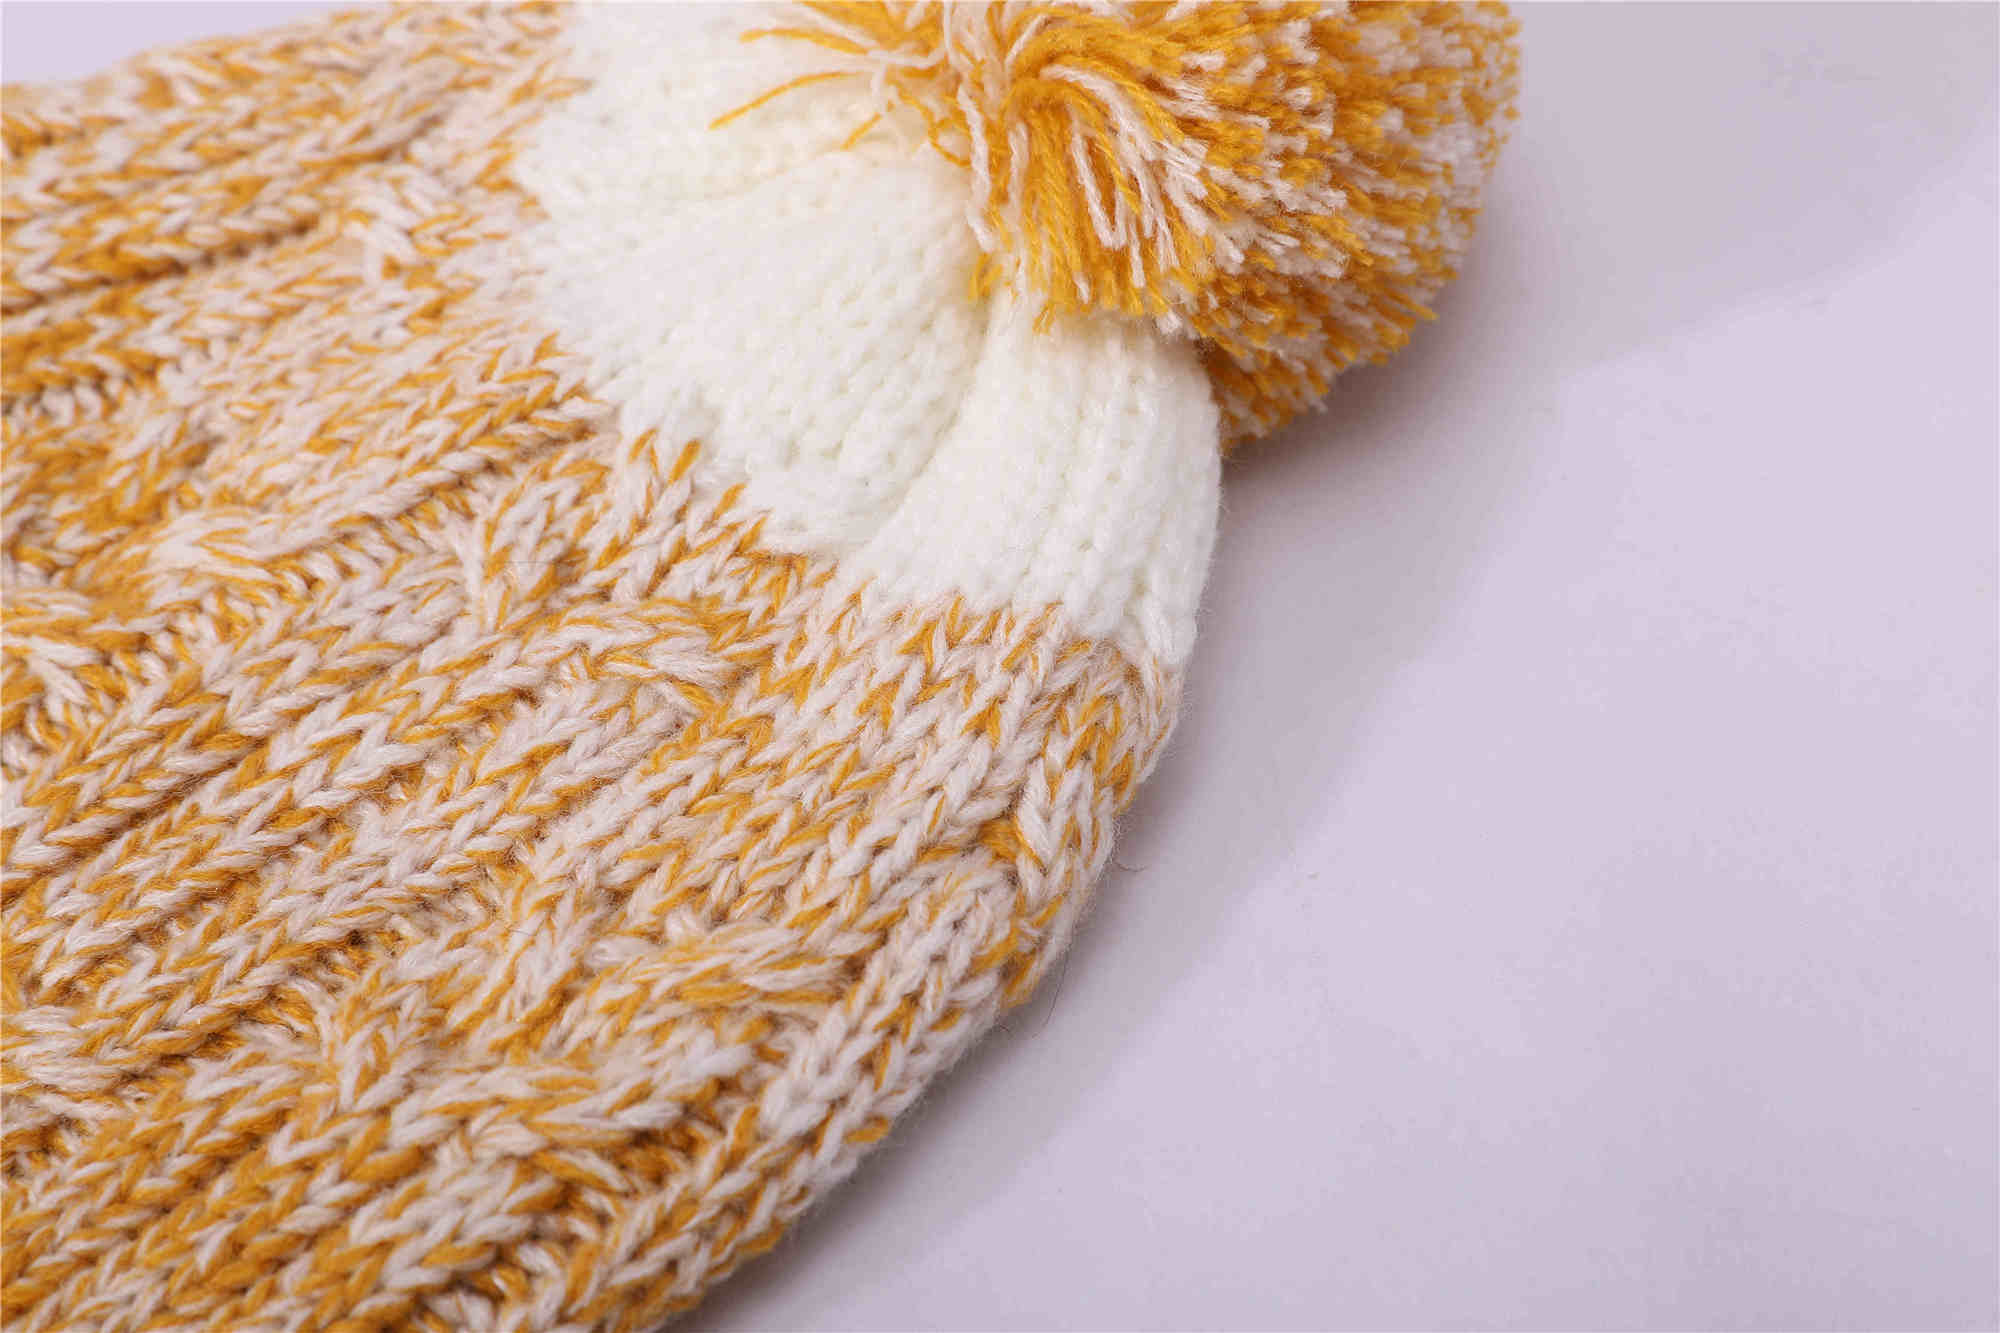 Custom ladies knitted cable beanie wholesale anti-pilling hats knitted beanie hat cap with pom poms